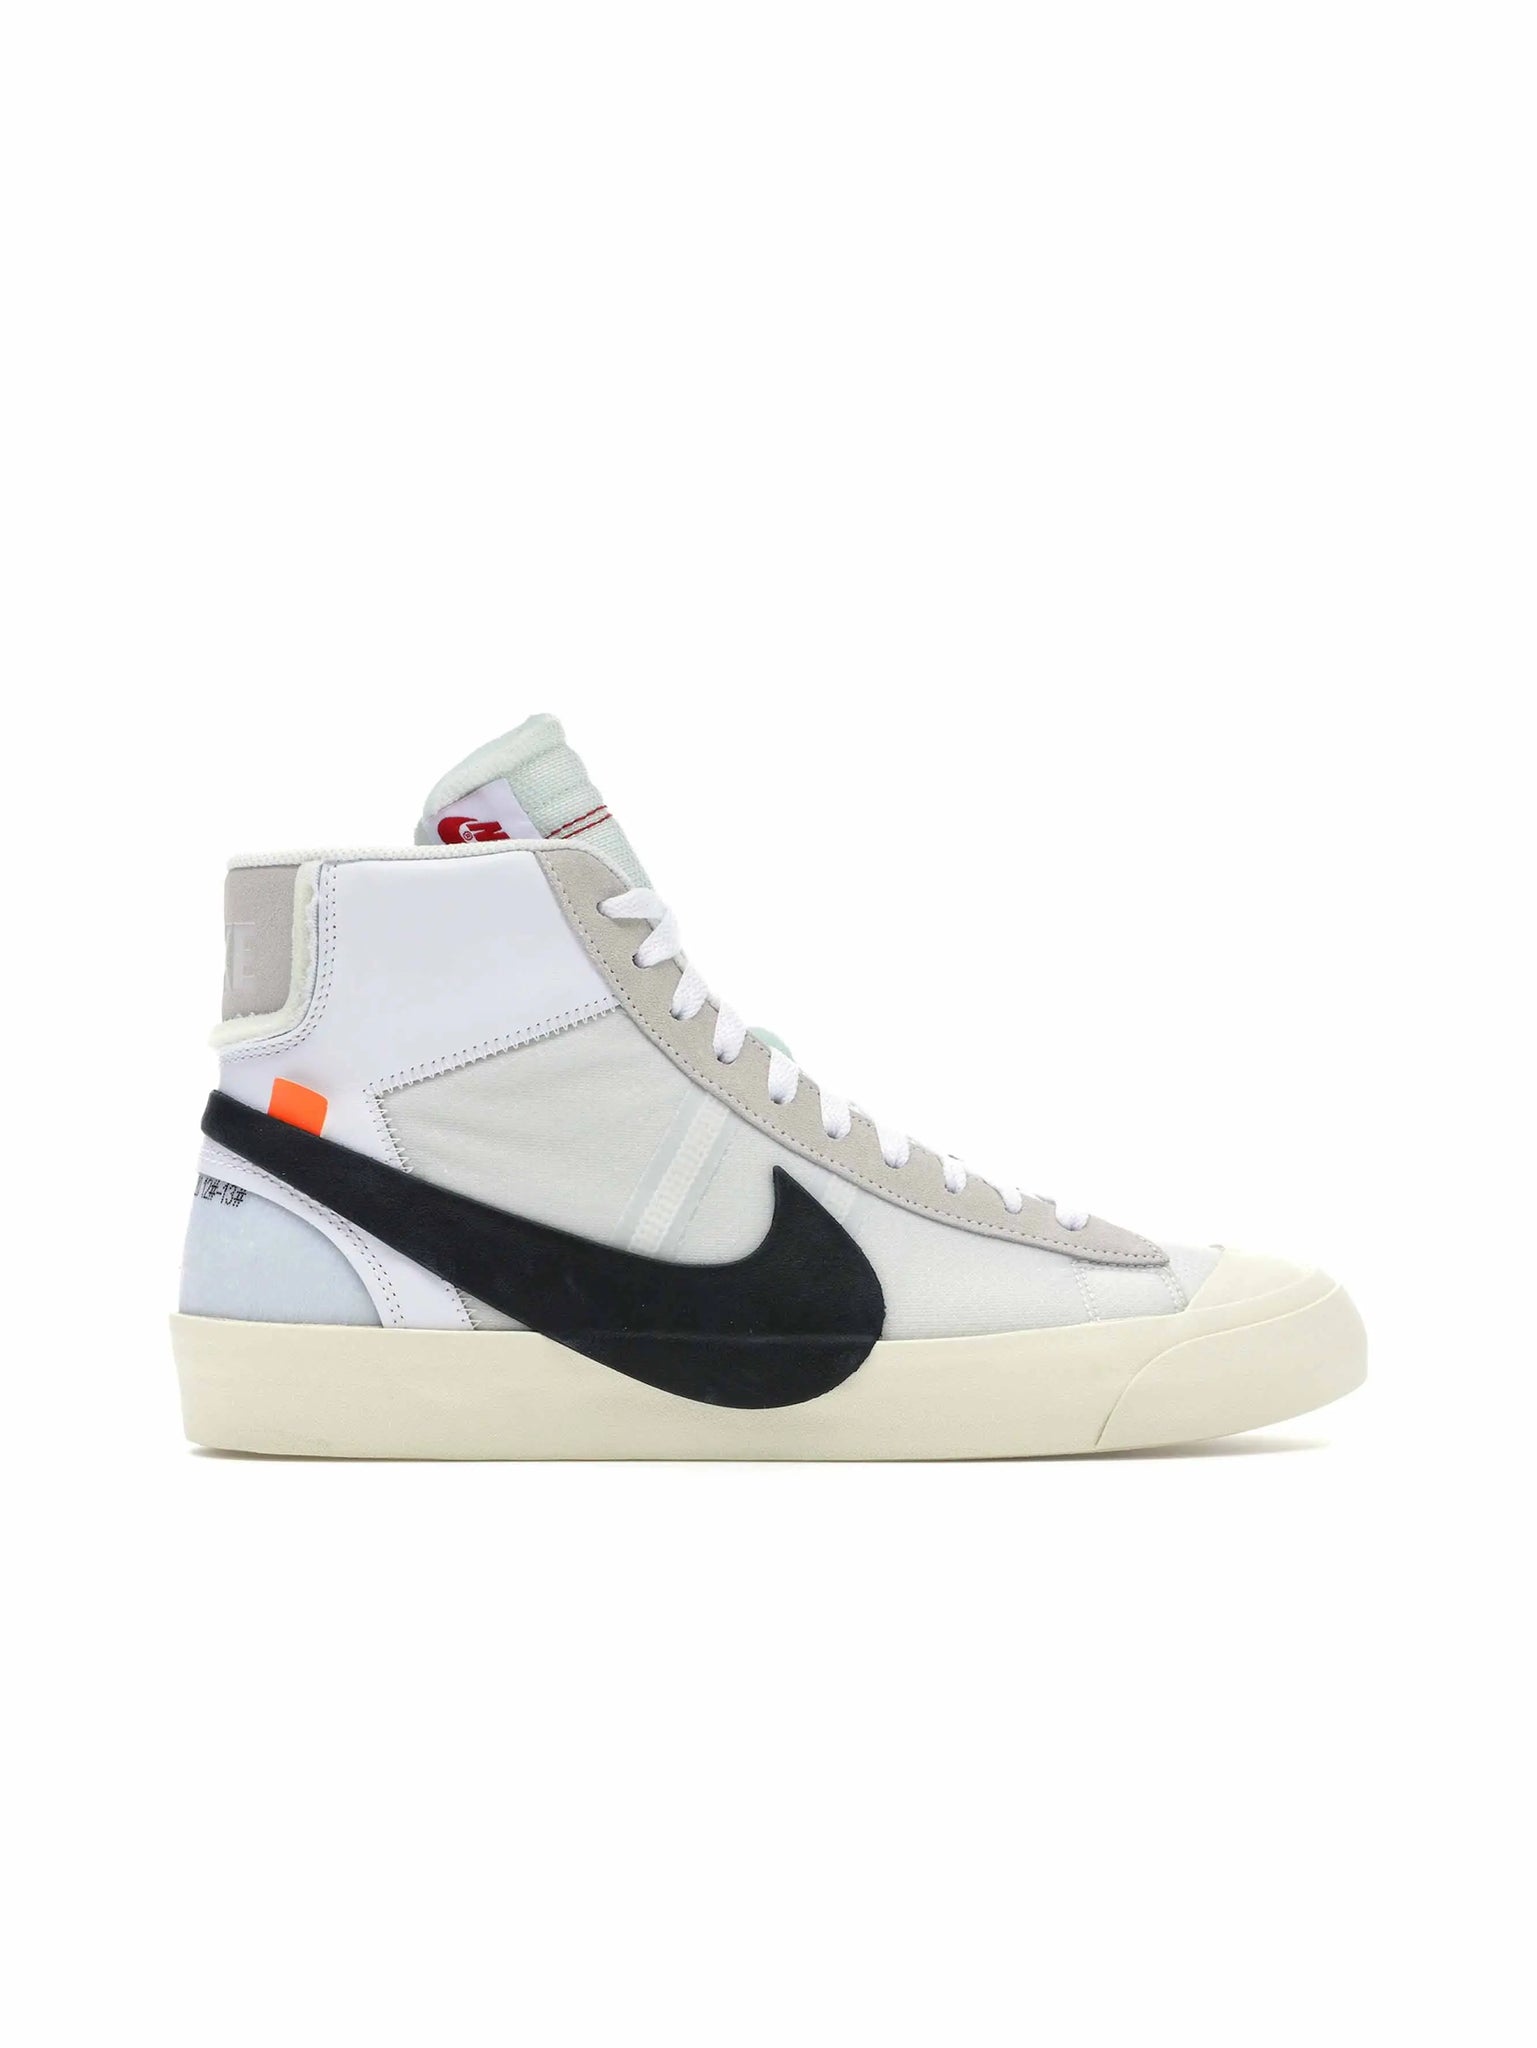 Nike Blazer Mid Off-White in Auckland, New Zealand - Shop name